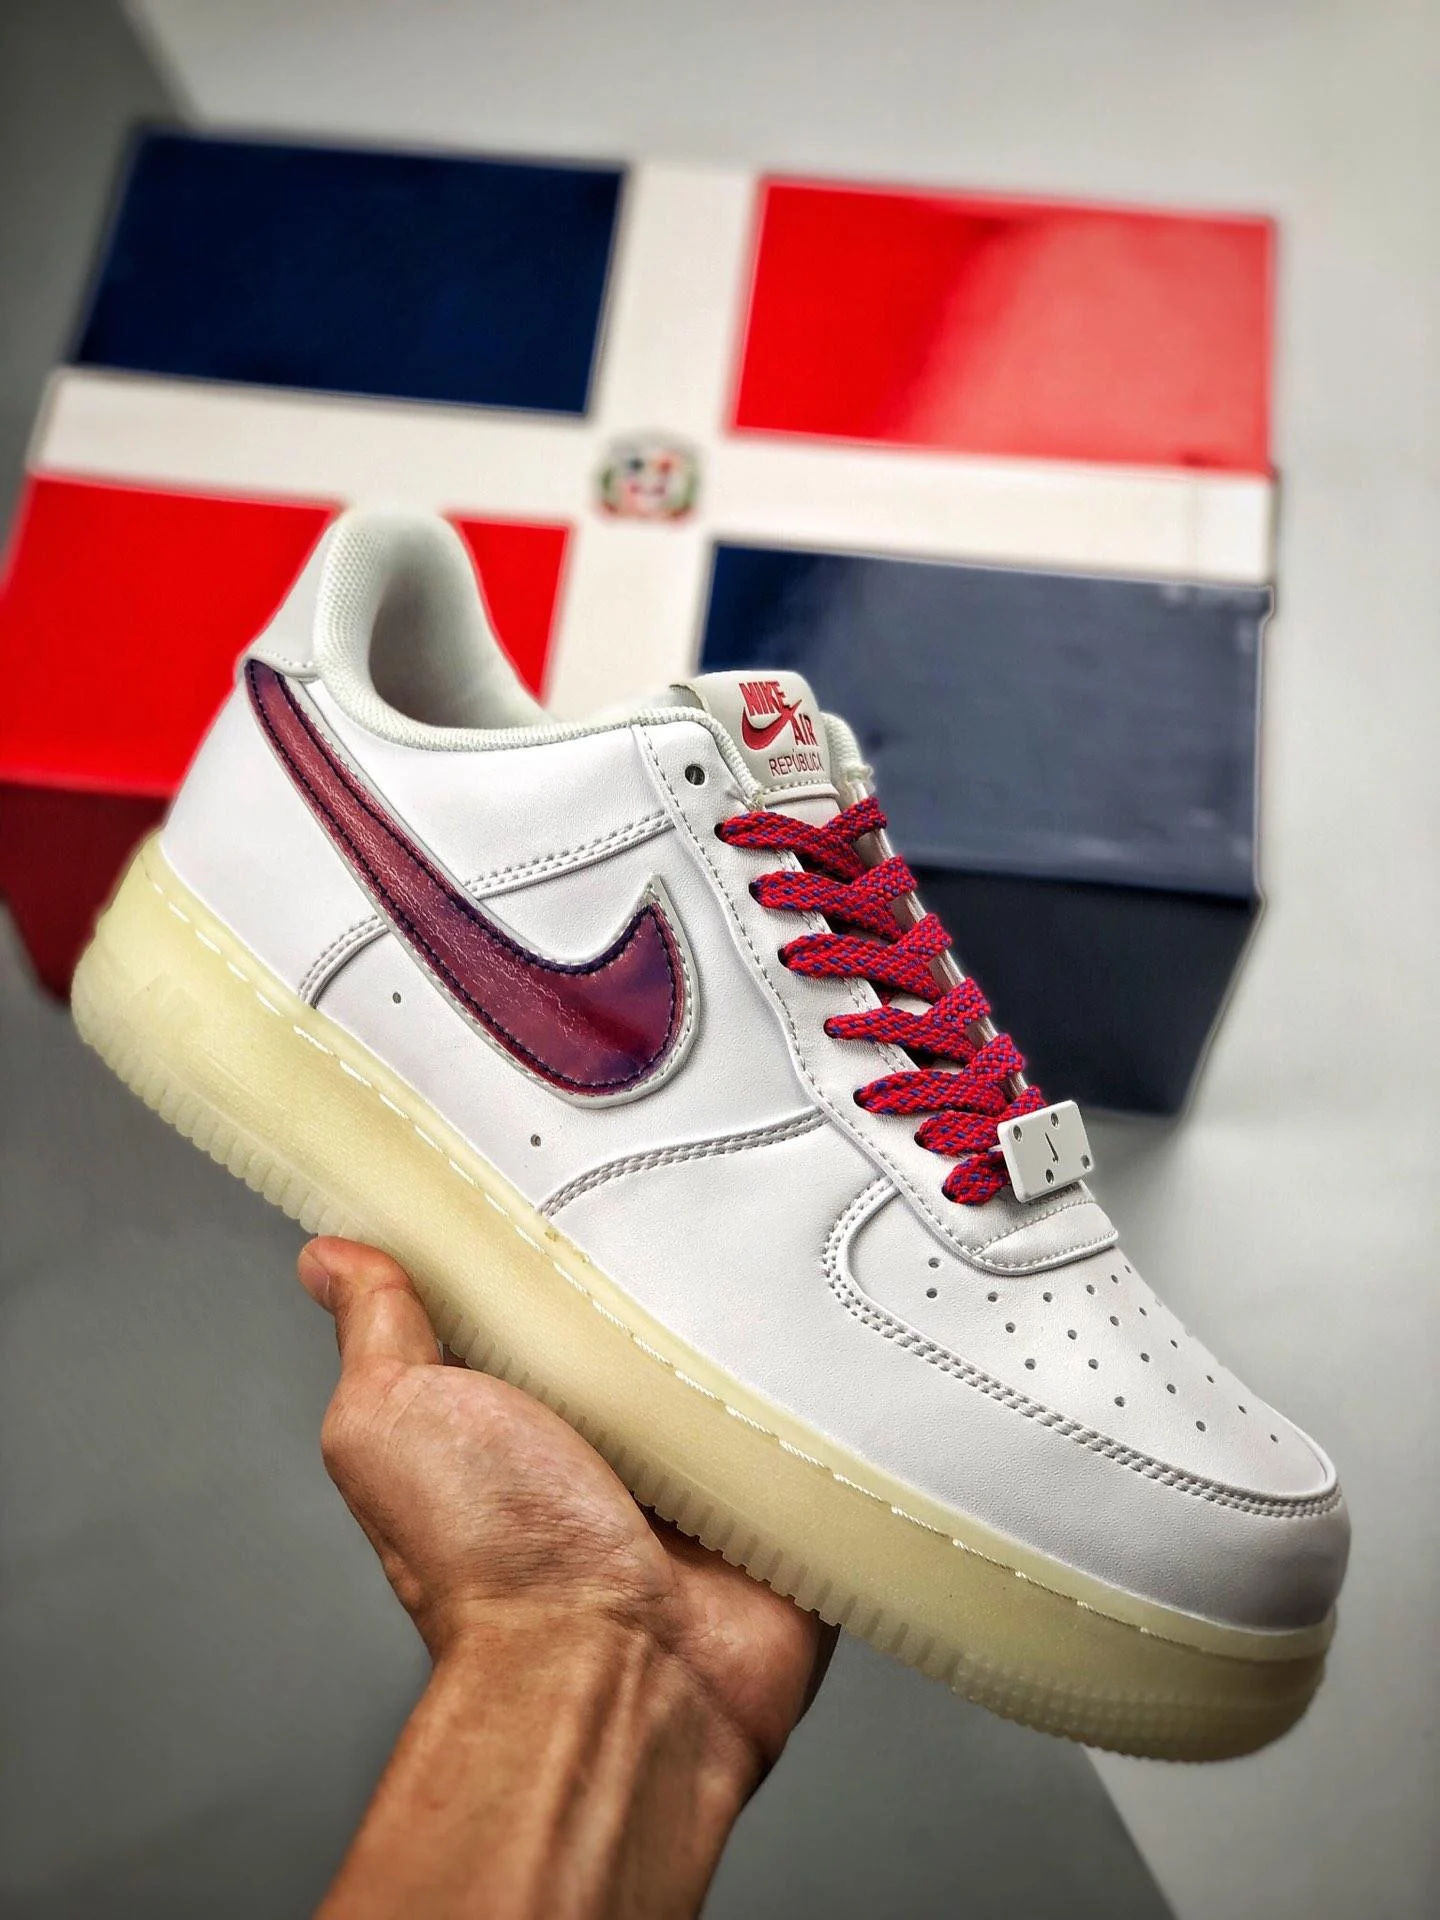 Nike Air Force 1 De Lo Mio White University Red-Sport Blue For Sale